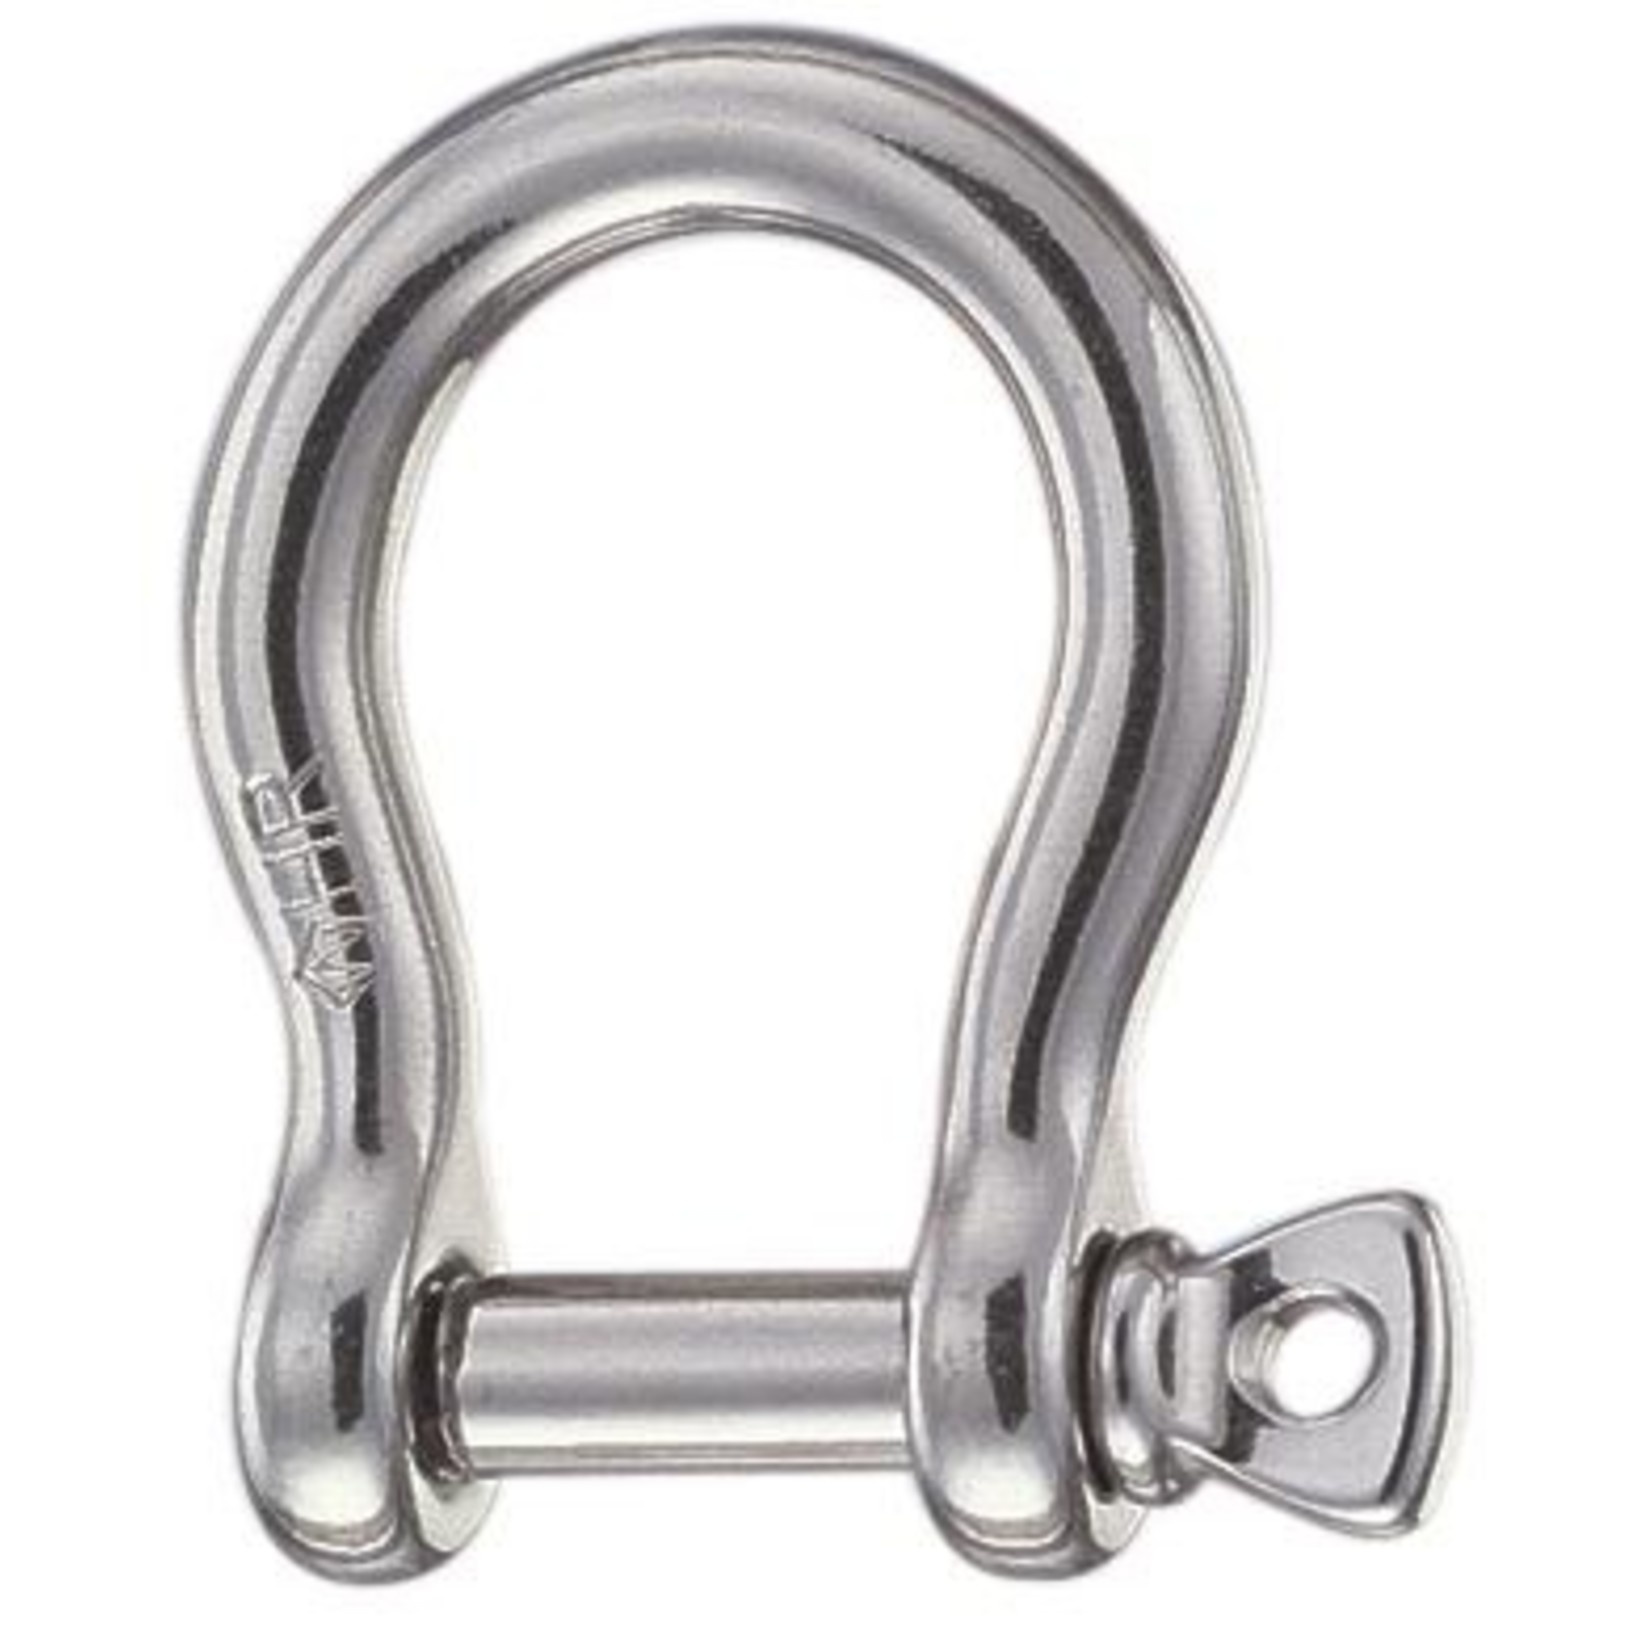 Wichard HR bow shackle - Dia 10 mm